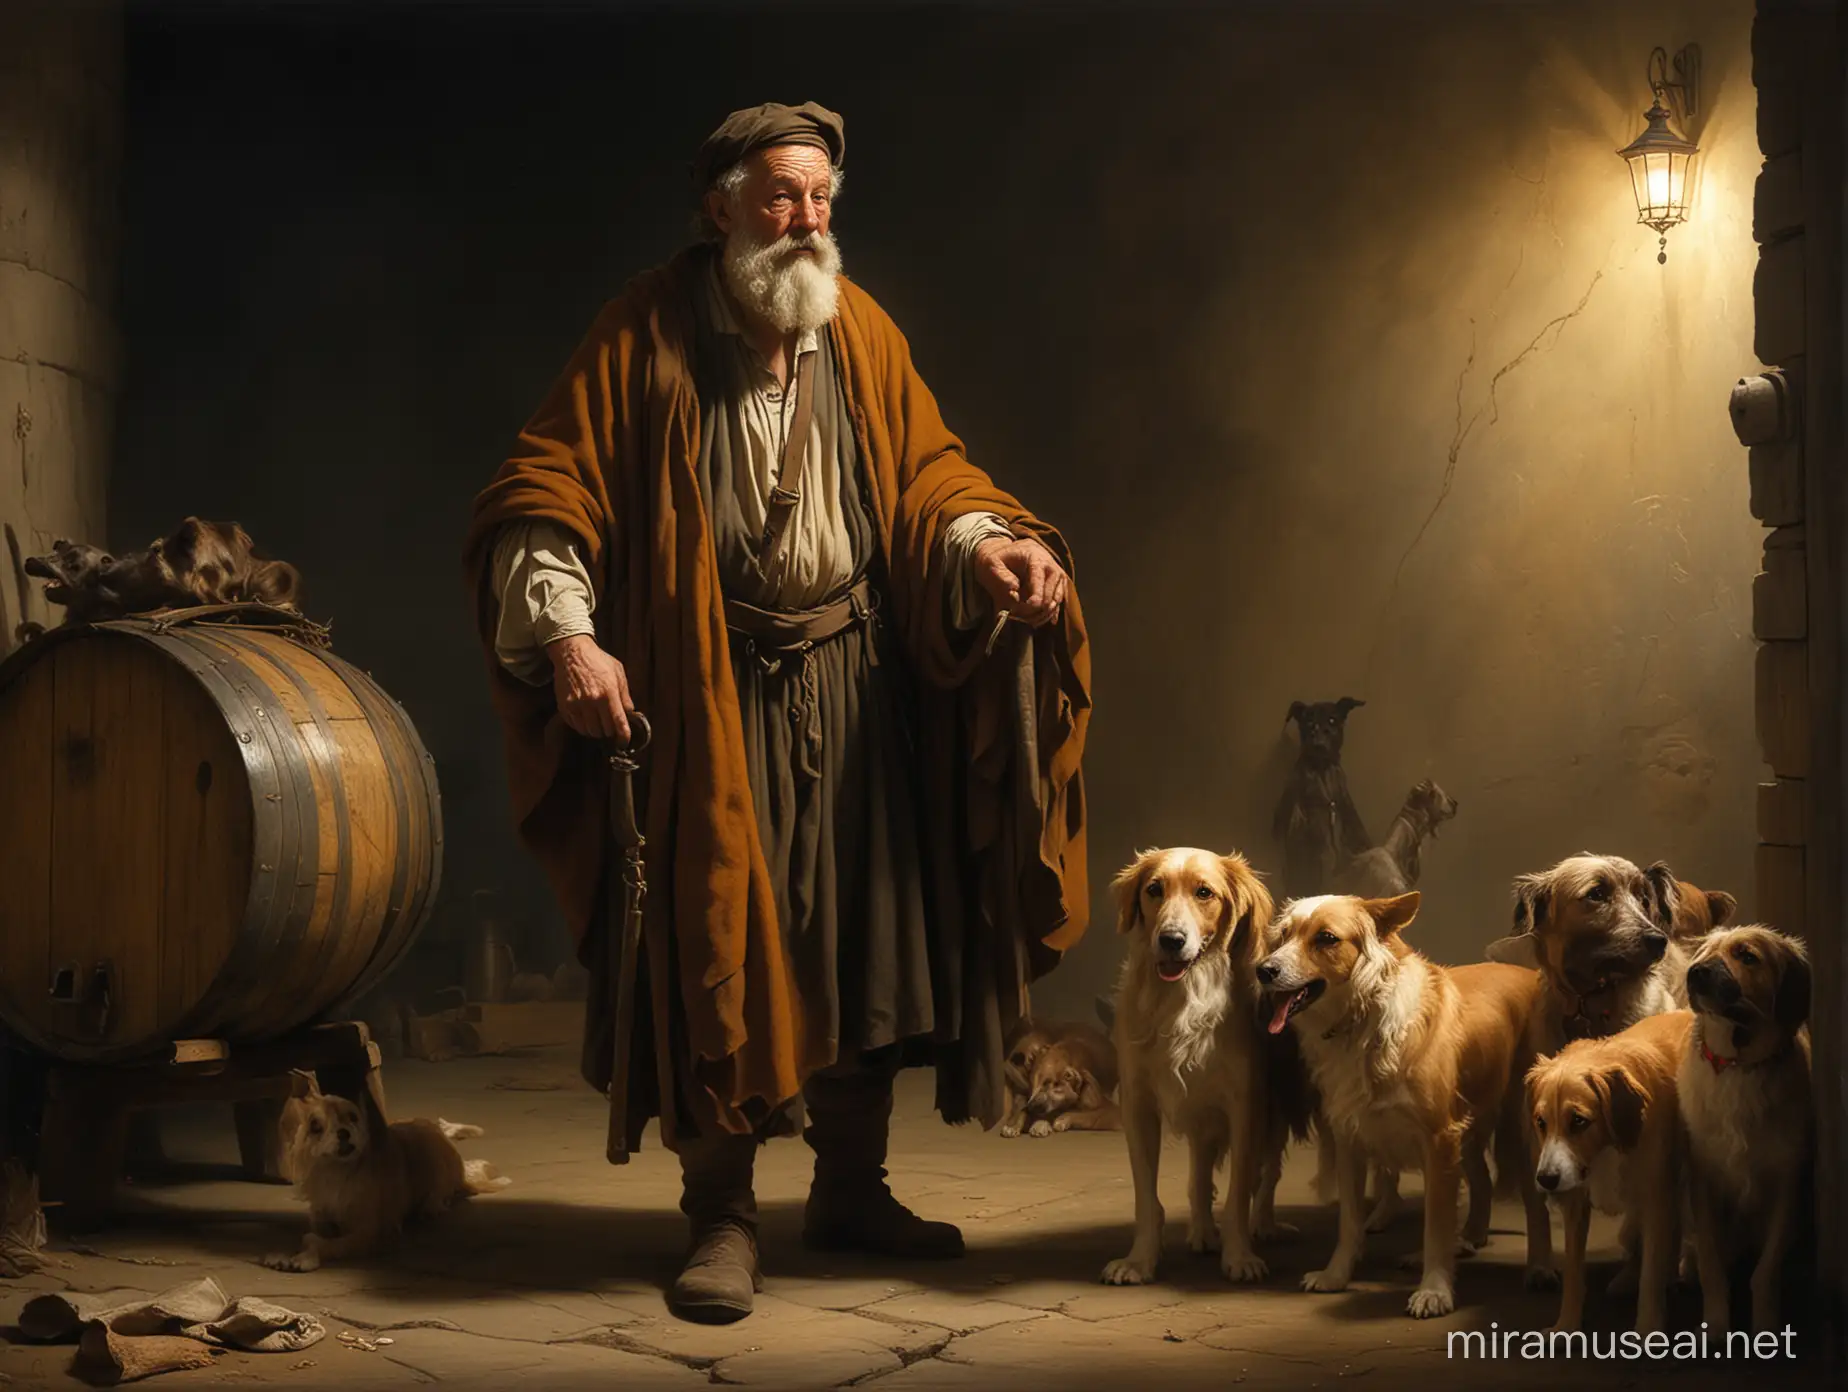 painting that will show the Philosopher diogenes wearing rags walking holding a lamp lit, with some dogs around, and in the background a kind of barrel he used as shelter, and some peoples looking to him worried, in a Rembrandt style, Dramatic use of light and shadow, a technique known as chiaroscuro, This creates a striking contrast between light and dark areas, often highlighting the focal point of the painting, His compositions often convey deep emotional or narrative intensity, Rembrandt's color palette is typically rich but subdued, featuring earthy tones and warm colors, His brushwork is renowned for its expressiveness and texture, ranging from smooth and finely detailed in areas of focus to more loose and impressionistic in other parts,